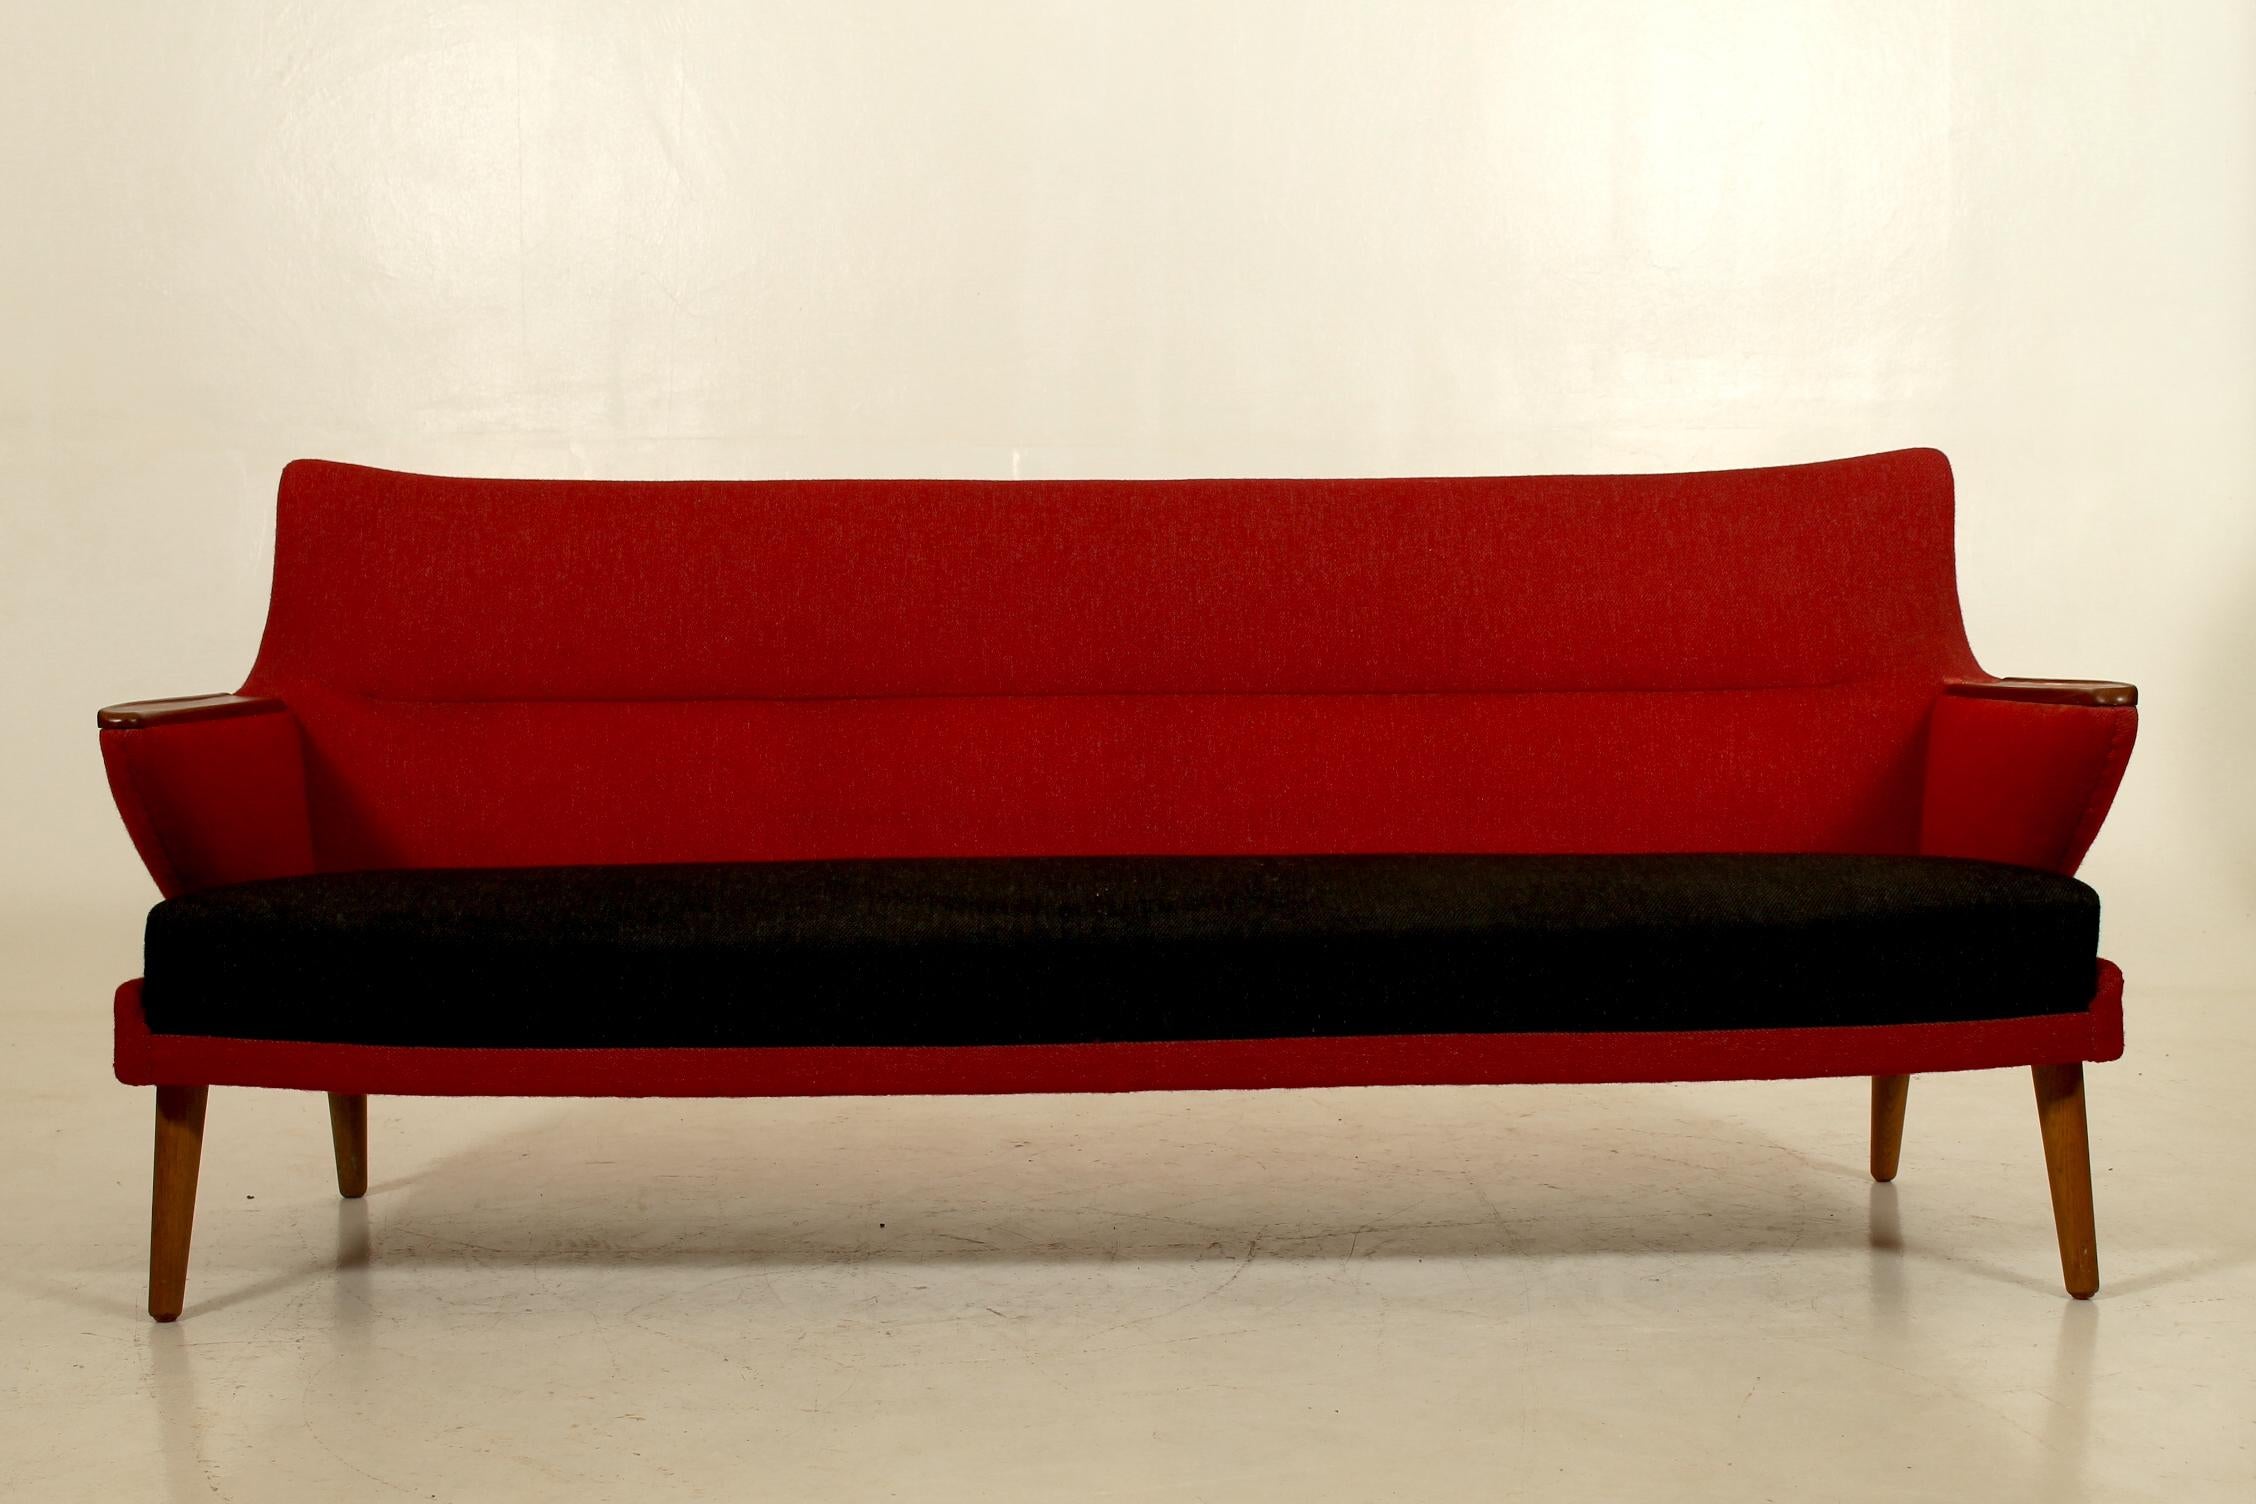 This beautiful sofa is a forerunner of the 50's beautiful and minimalist approach to design. The clean lines and lightness of the sofa are combined with incredible quality and professional craftsmanship.
Designed by Kurt Østervig and manufactured by